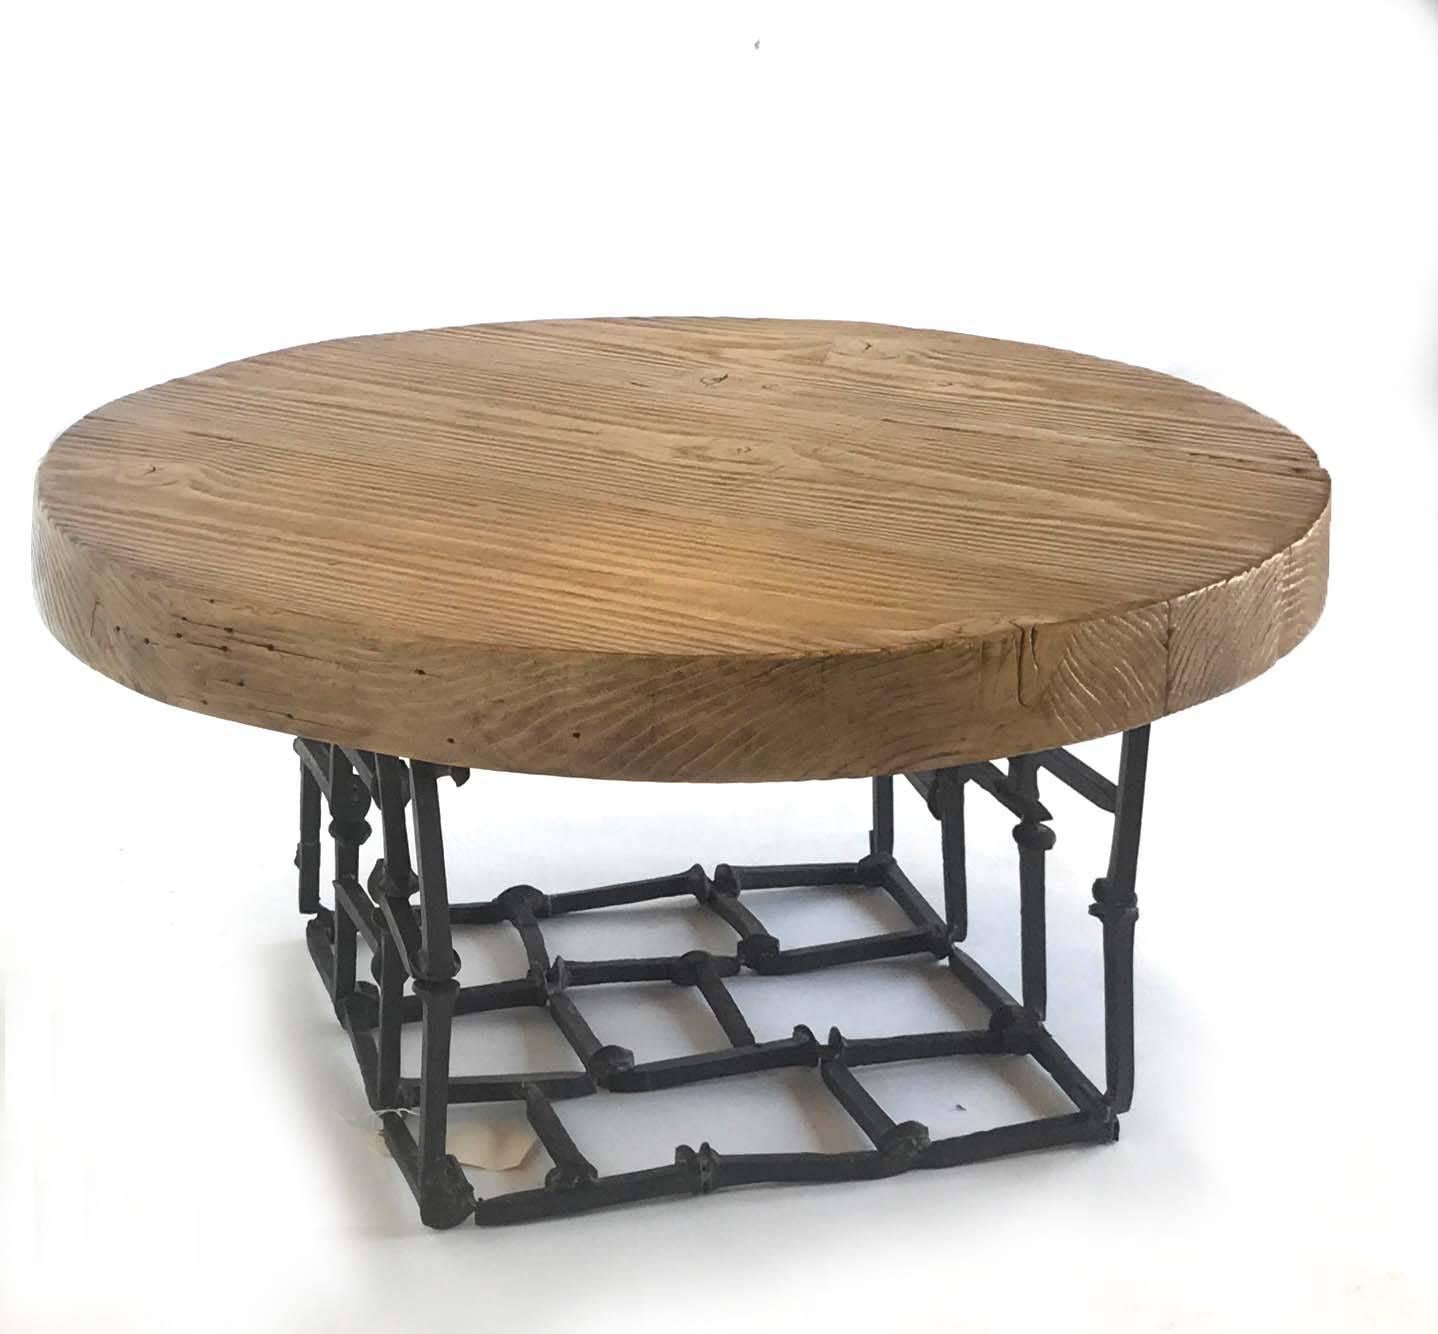 Modern Primitive low table made of vintage elements. 100 year old wood beam top in natural finish with naturally occurring distress. Smooth to the touch, beautiful patina.
Base is made of vintage railroad spikes. Made by Dos Gallos Studio in Los